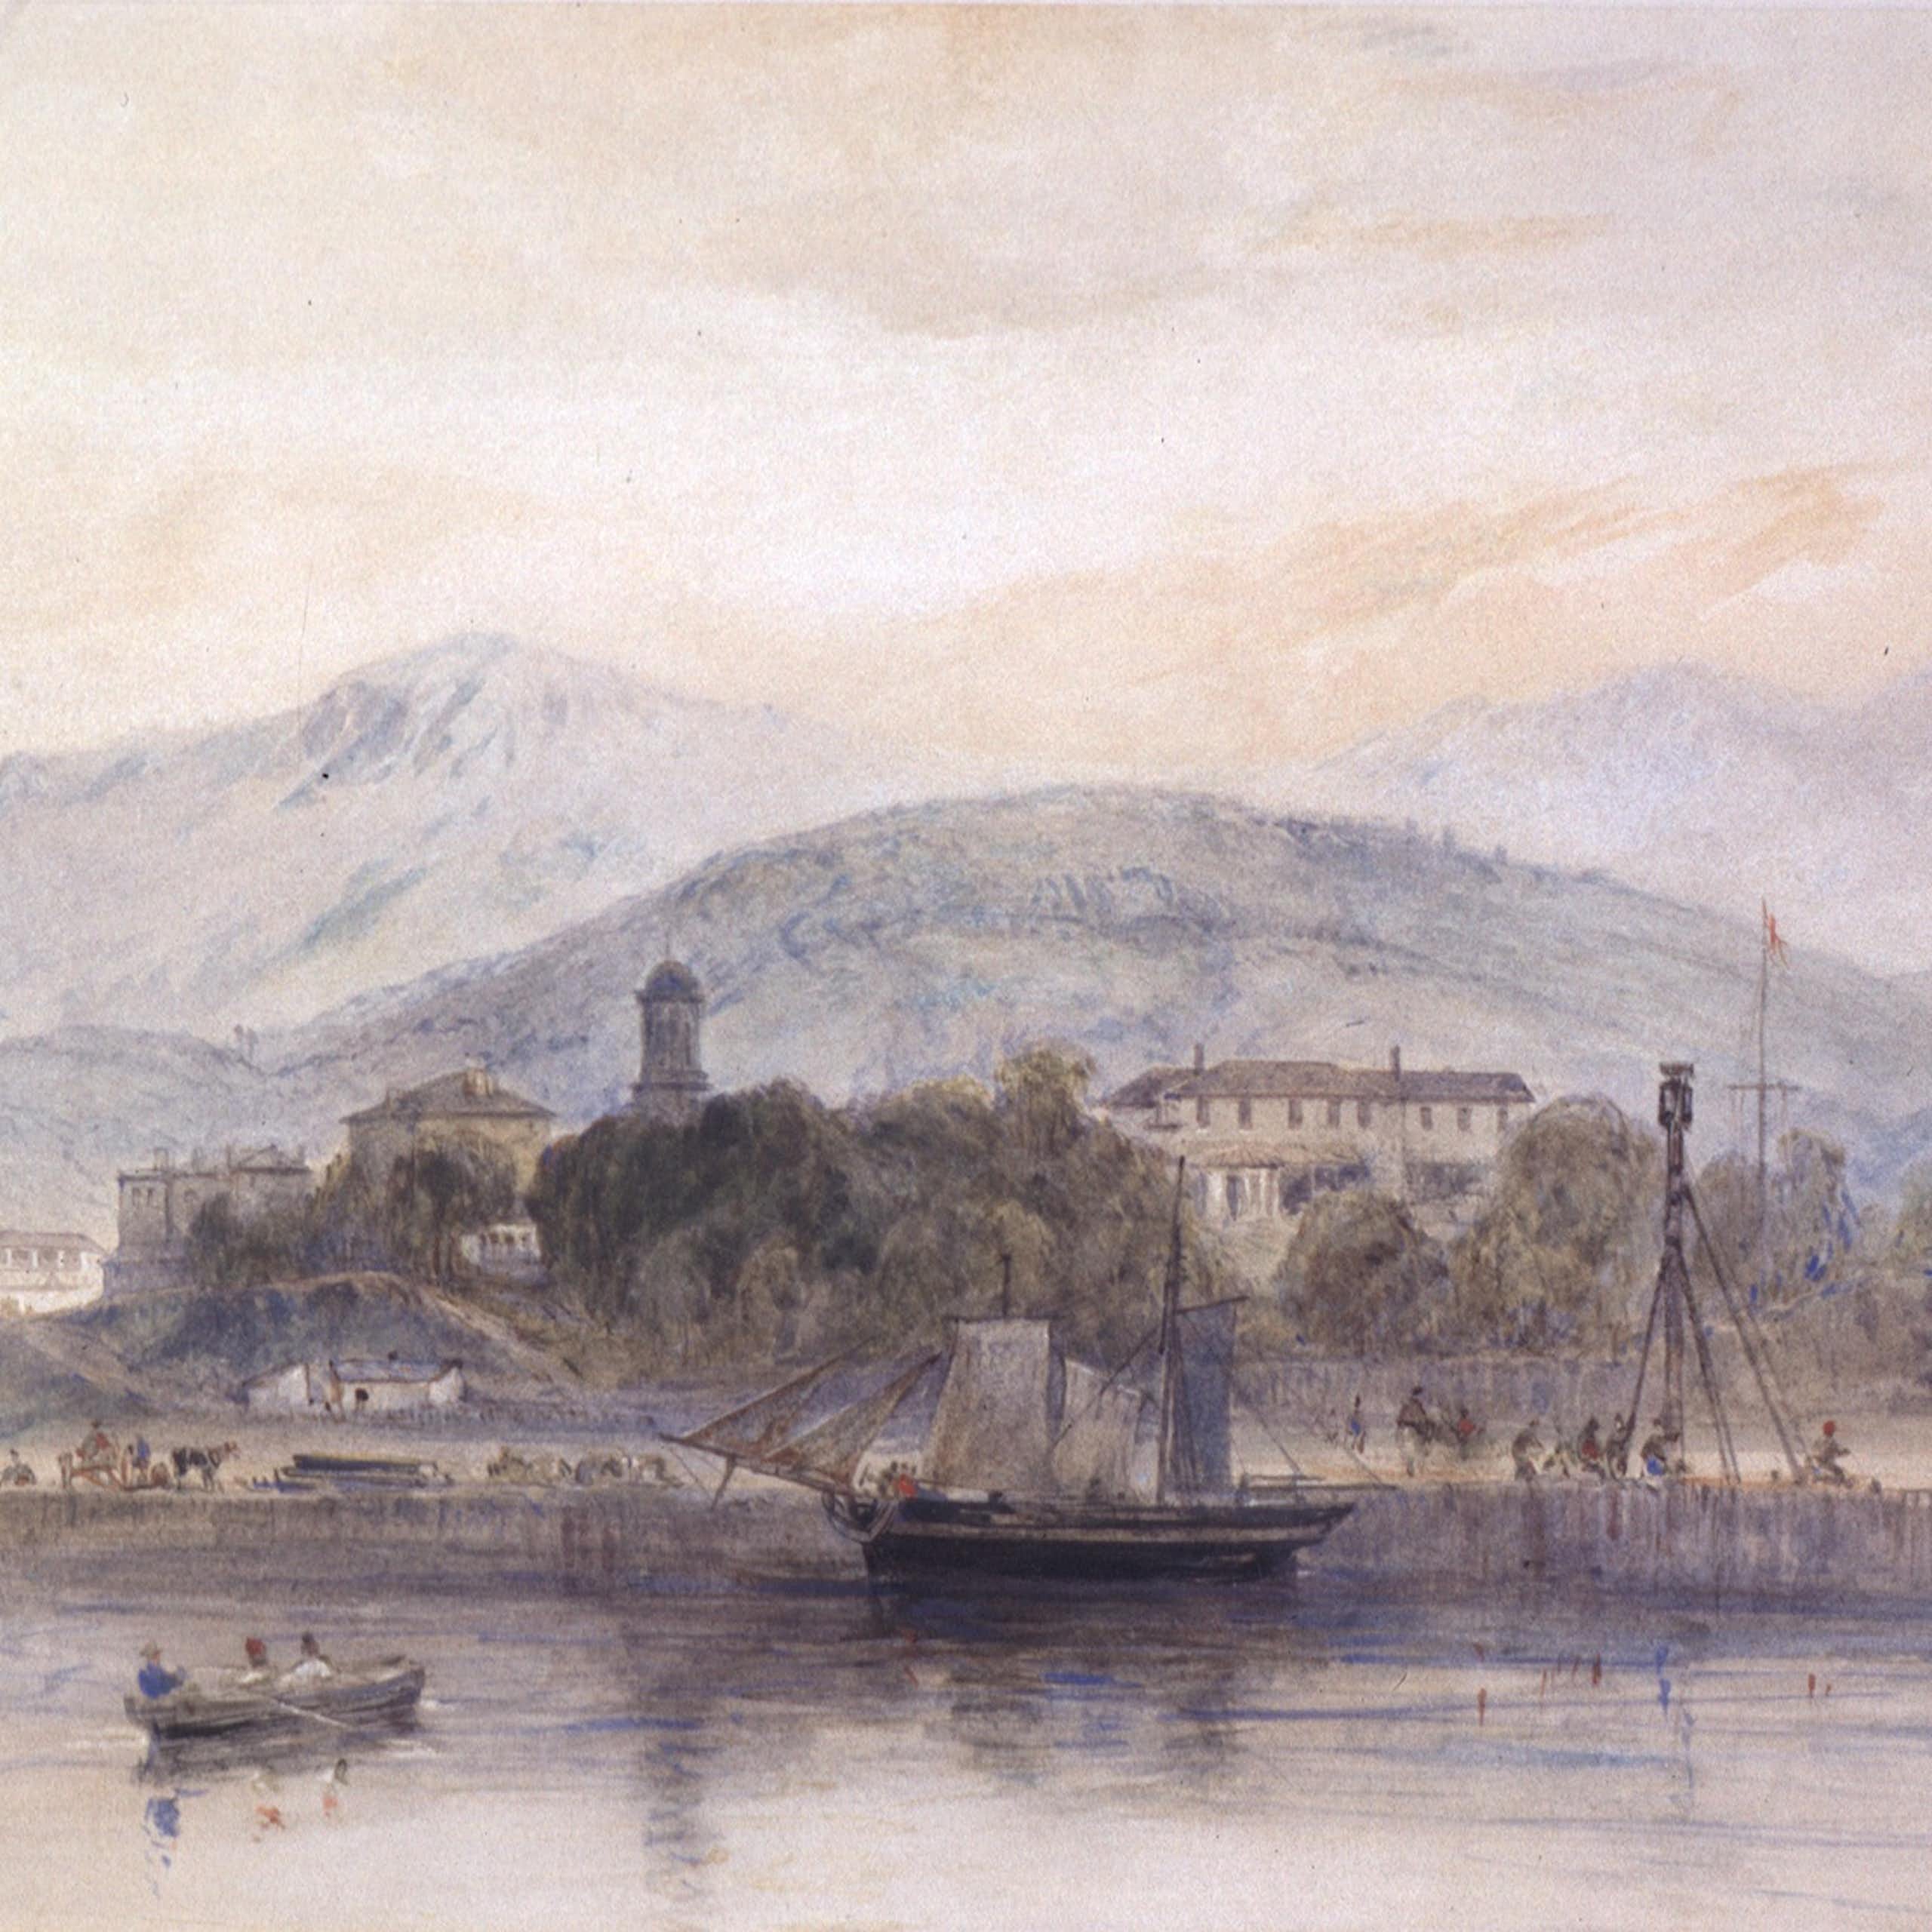 A painting of Hobart in 1844.